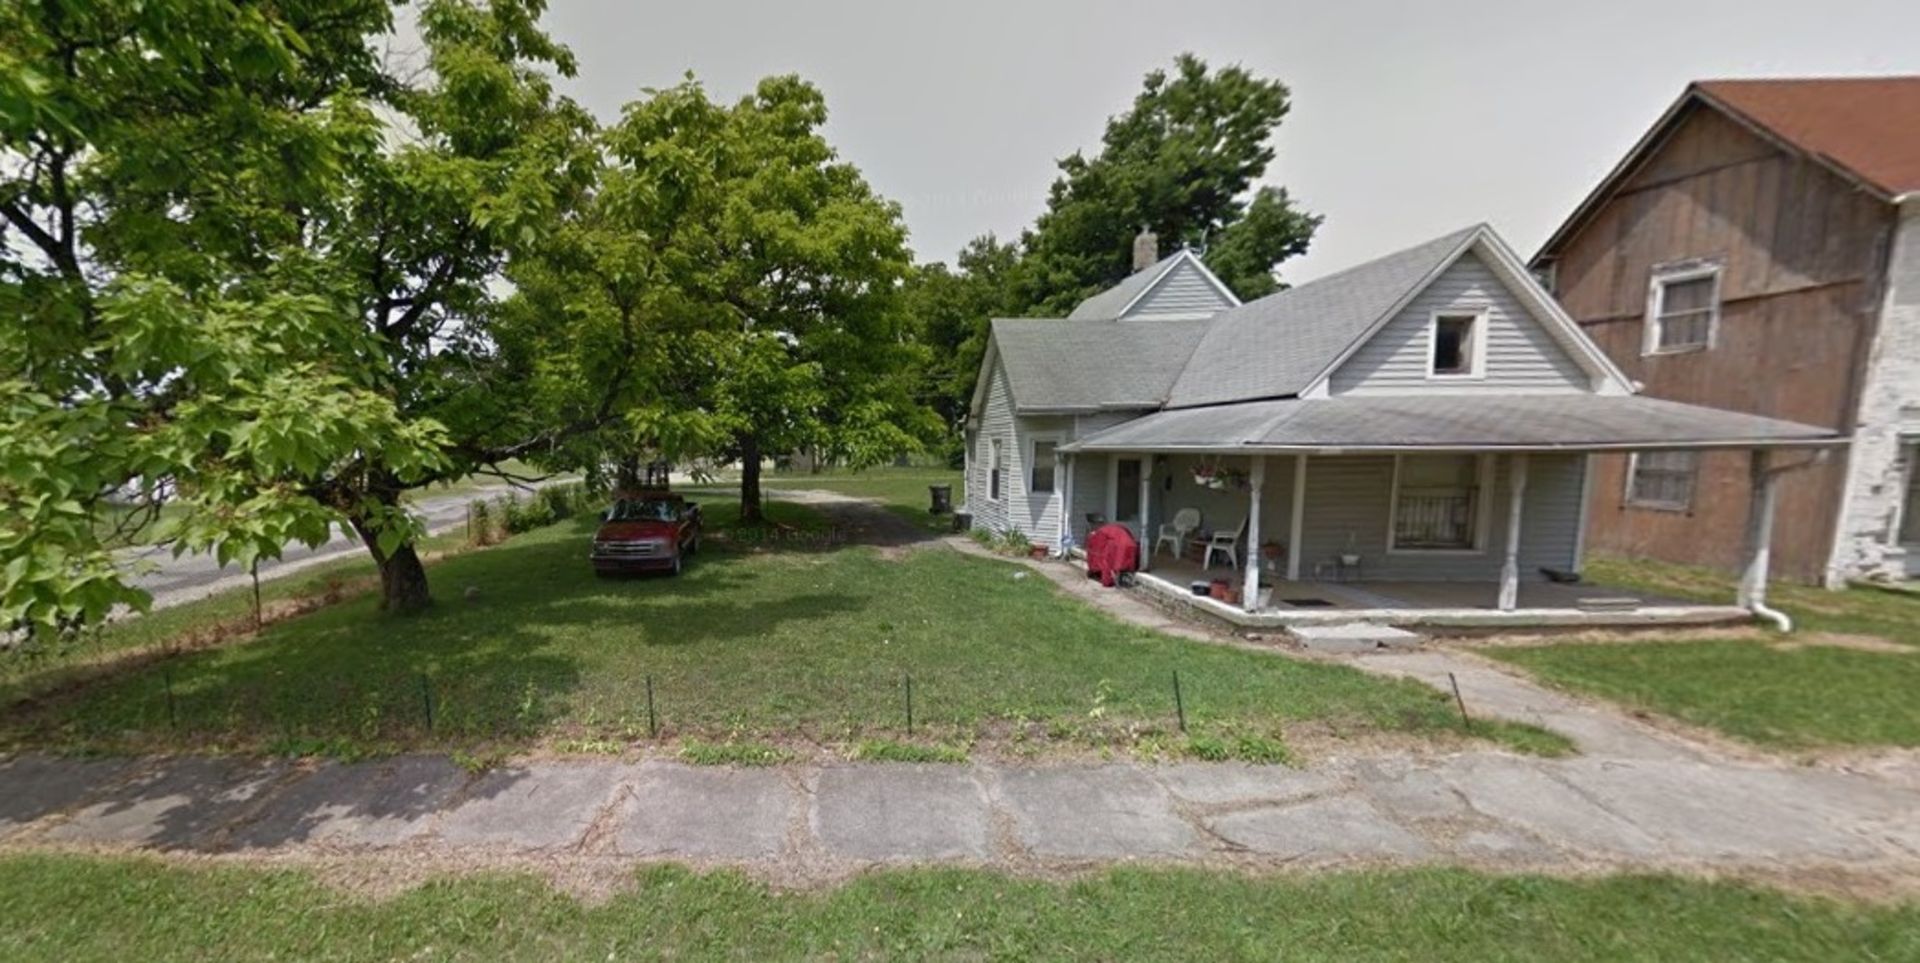 2202 SHELDON ST, INDIANAPOLIS, INDIANA 46218   NICE RESIDENTIAL PLOT OF LAND WITH MATURE TREES! GOOD - Image 3 of 12